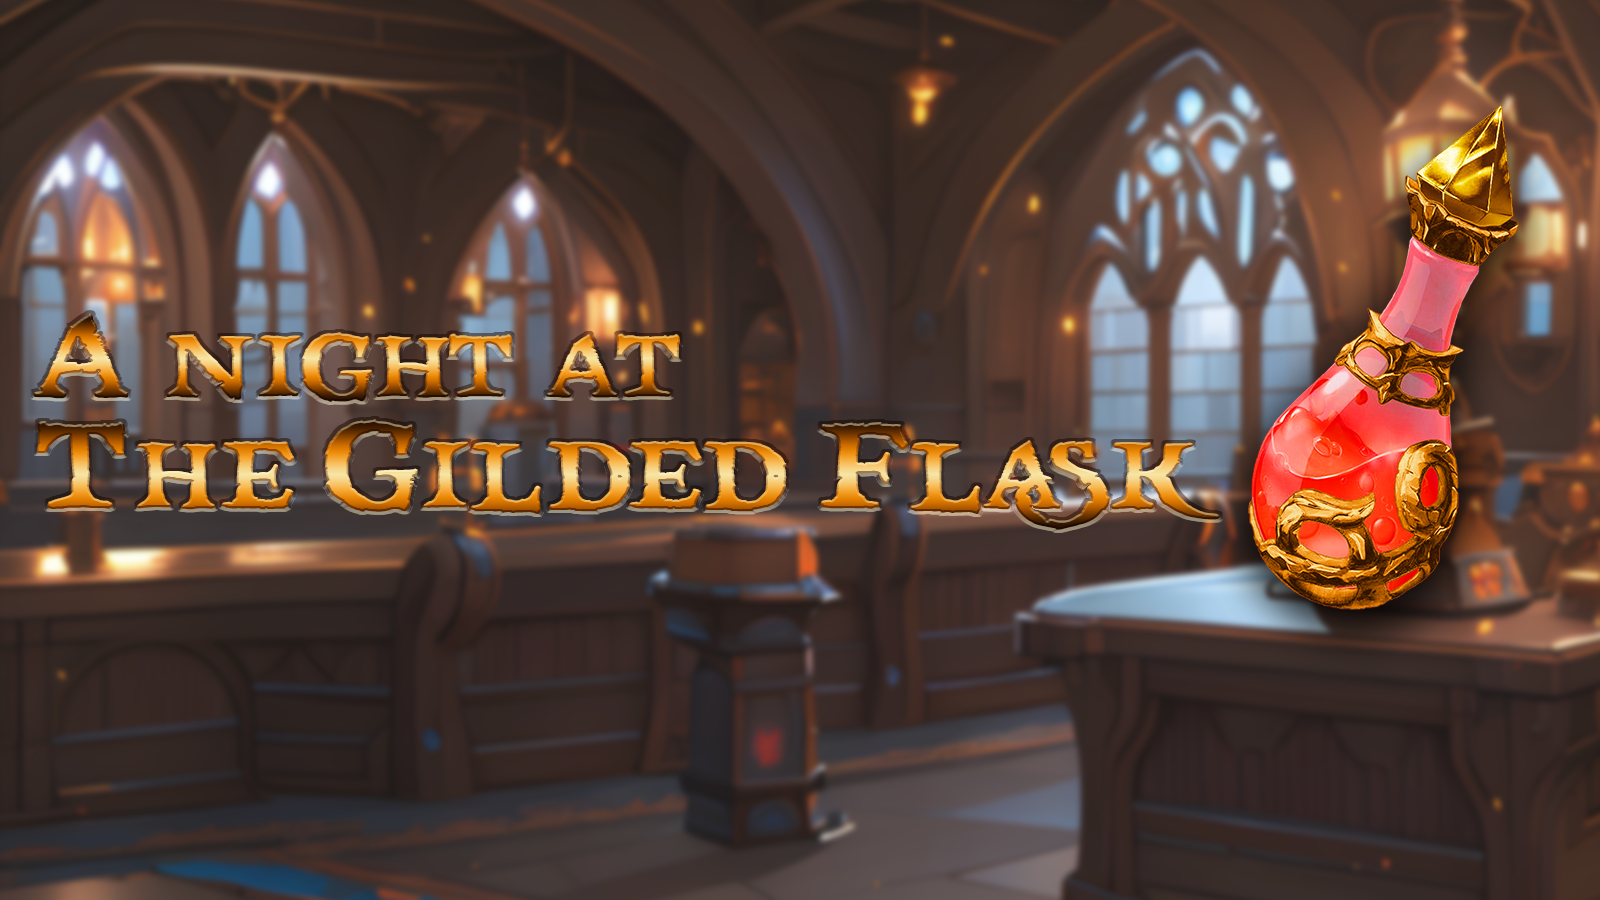 A night at The Gilded Flask